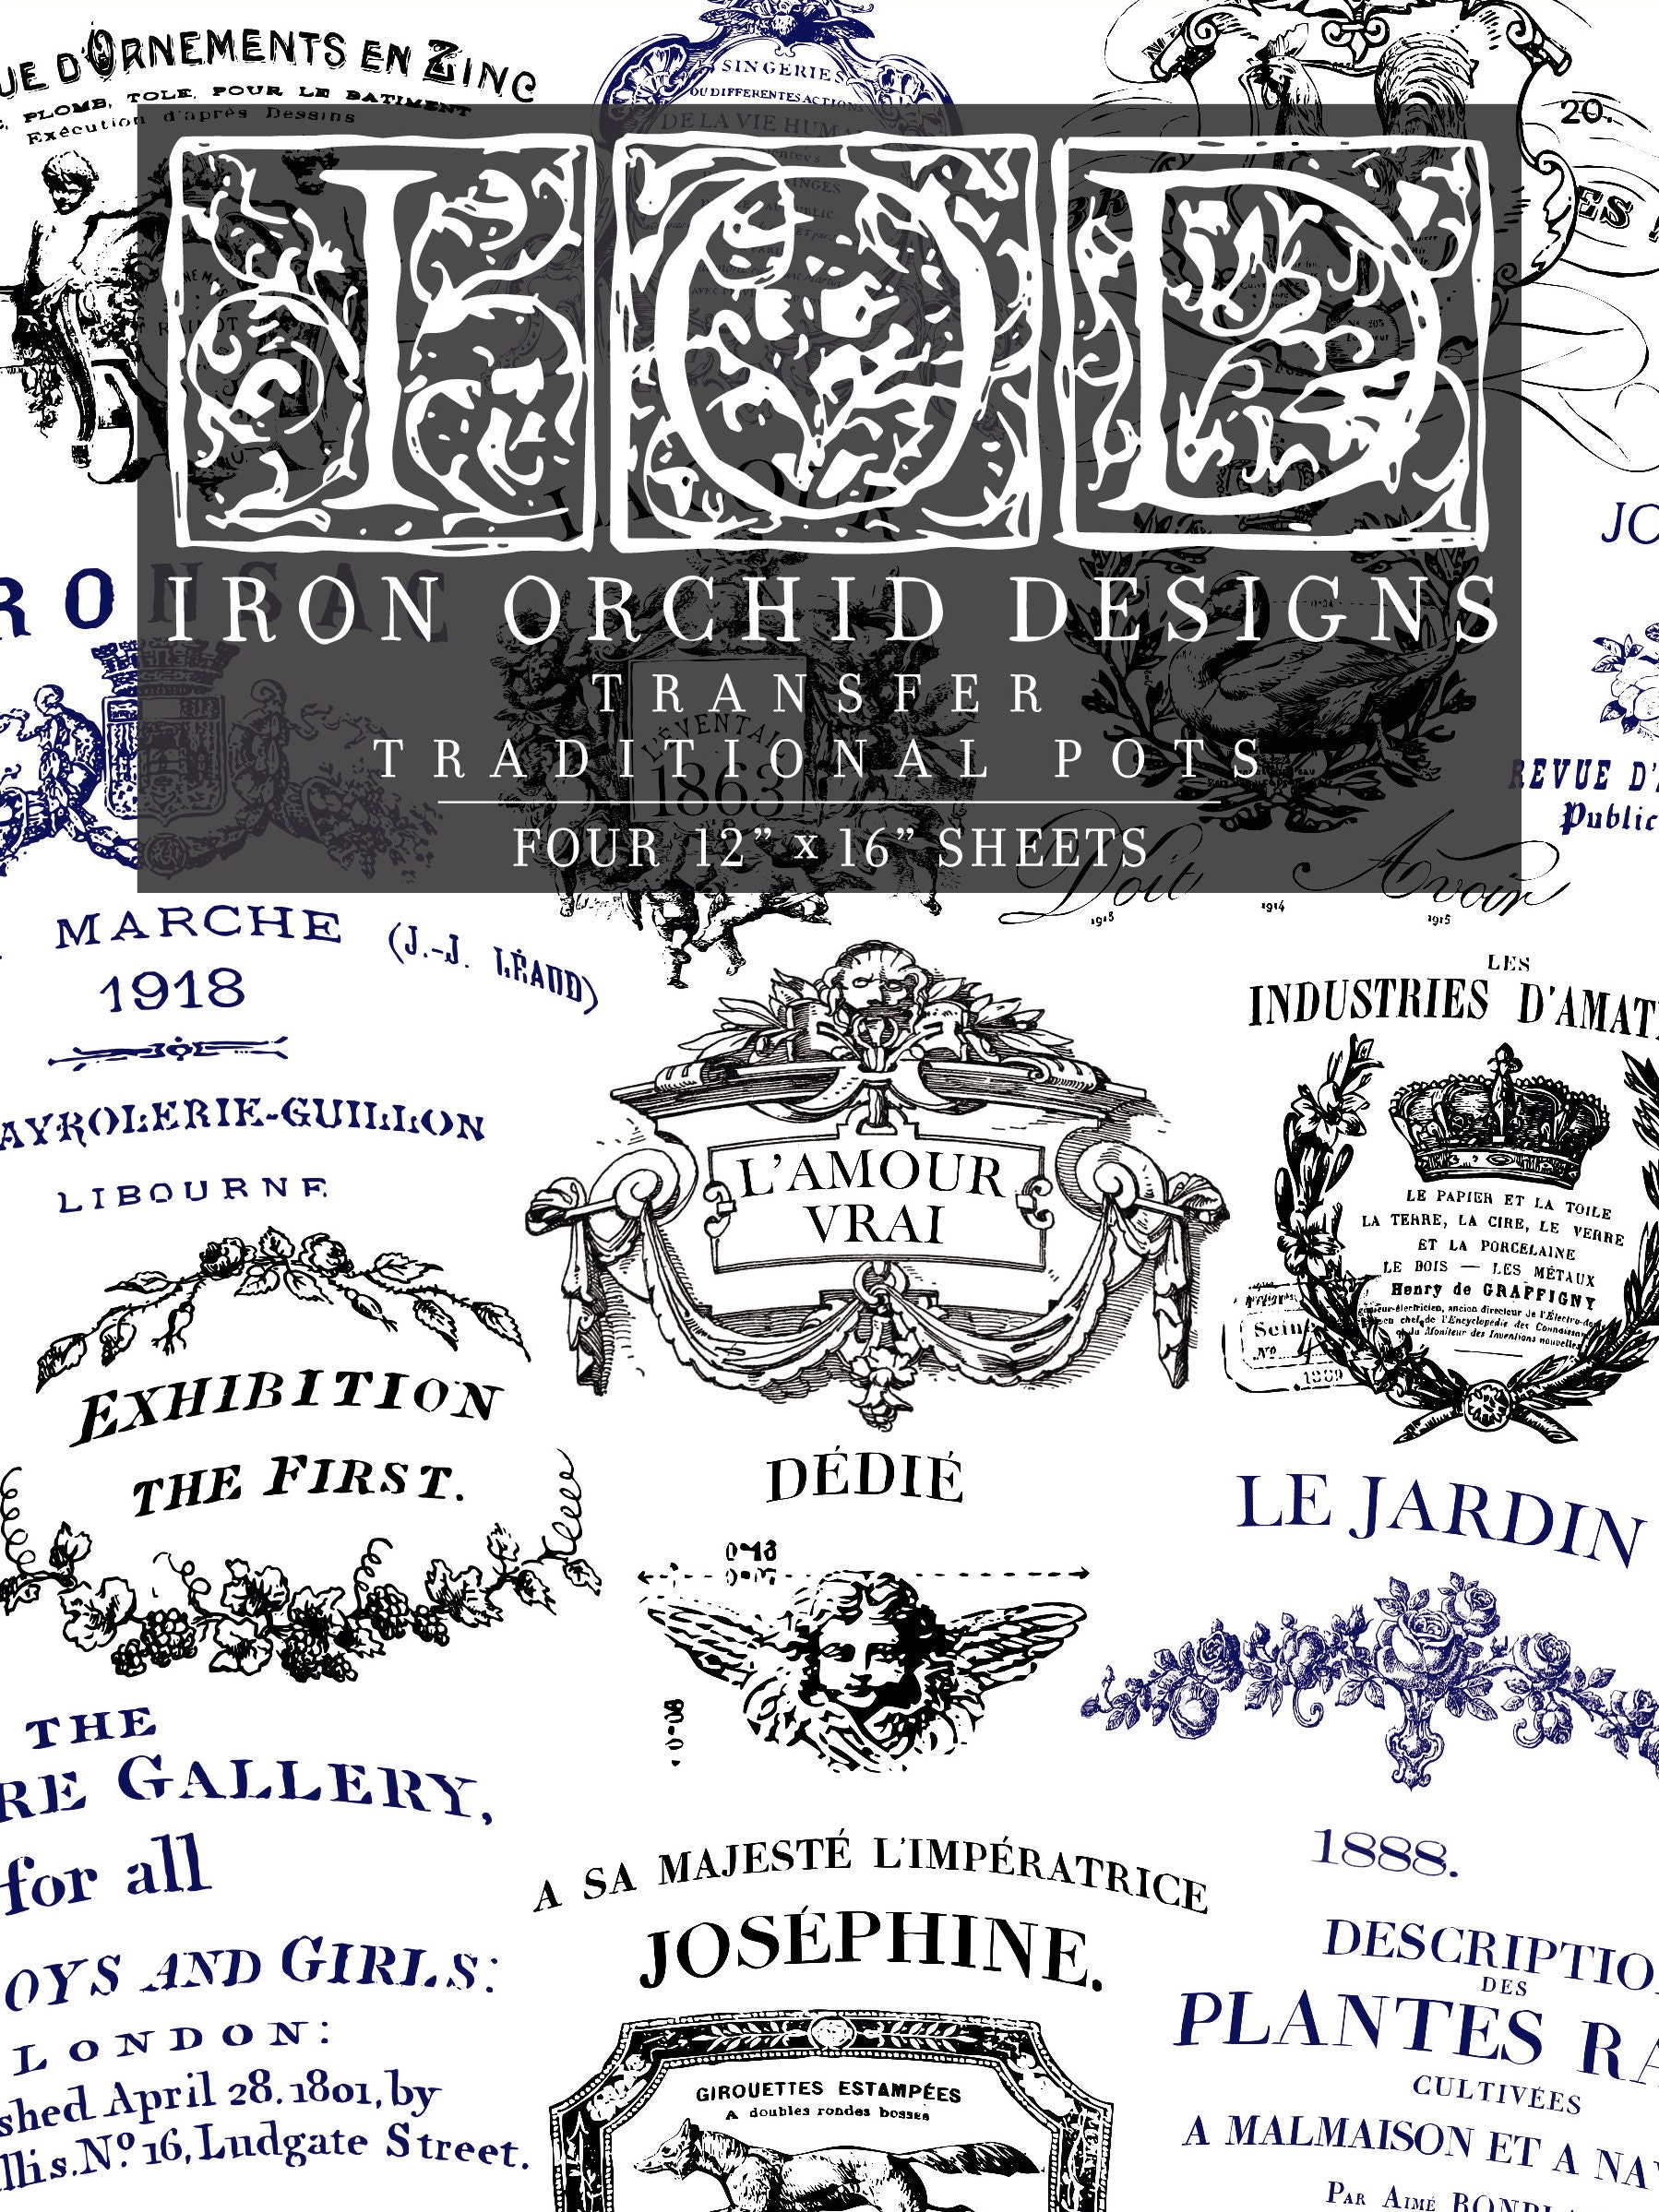 June Ode to Henry Fletcher IOD Transfers/iron Orchid Designs 